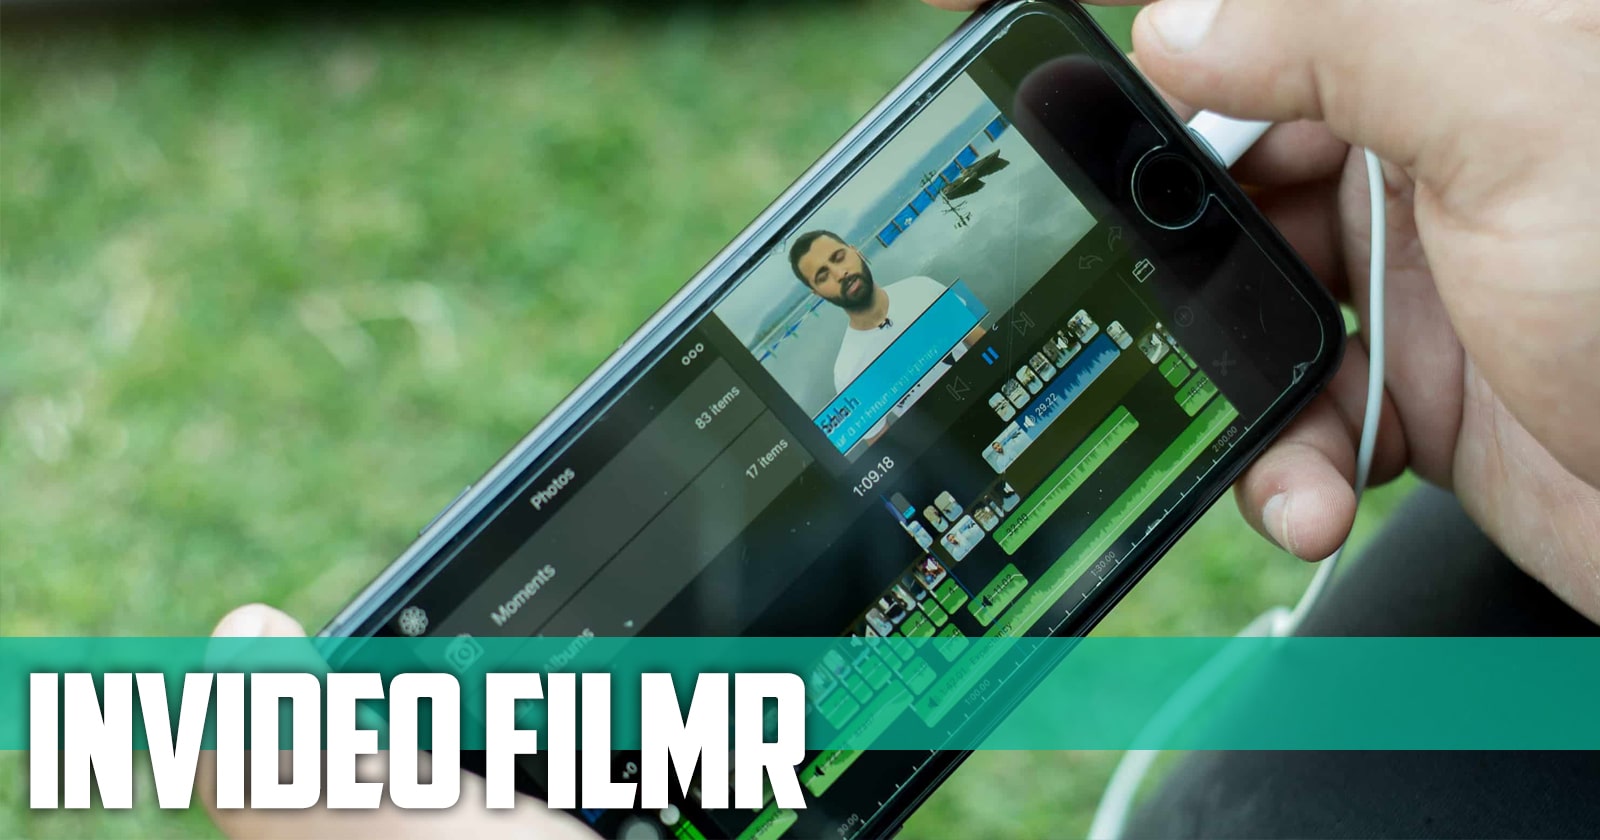 InVideo Filmr is a great video editor for beginners as well as advanced users